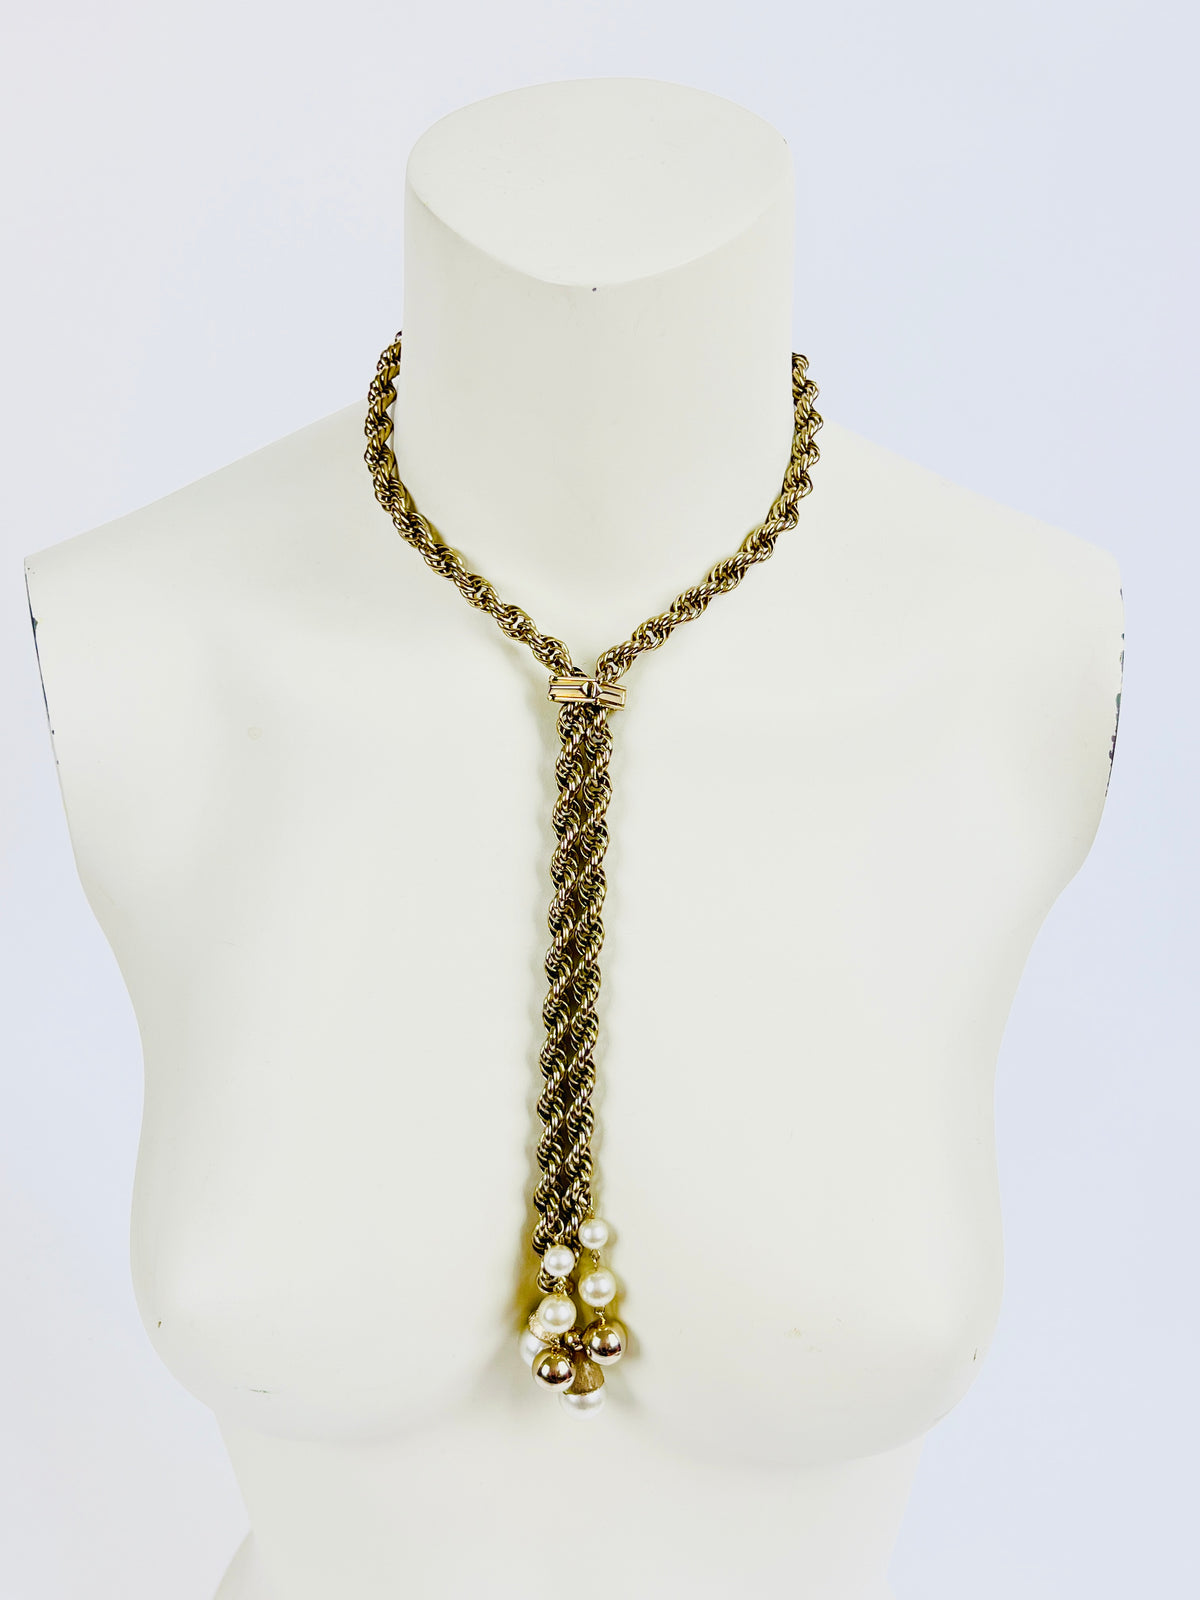 Vintage Adjustable Rope Chain Necklace